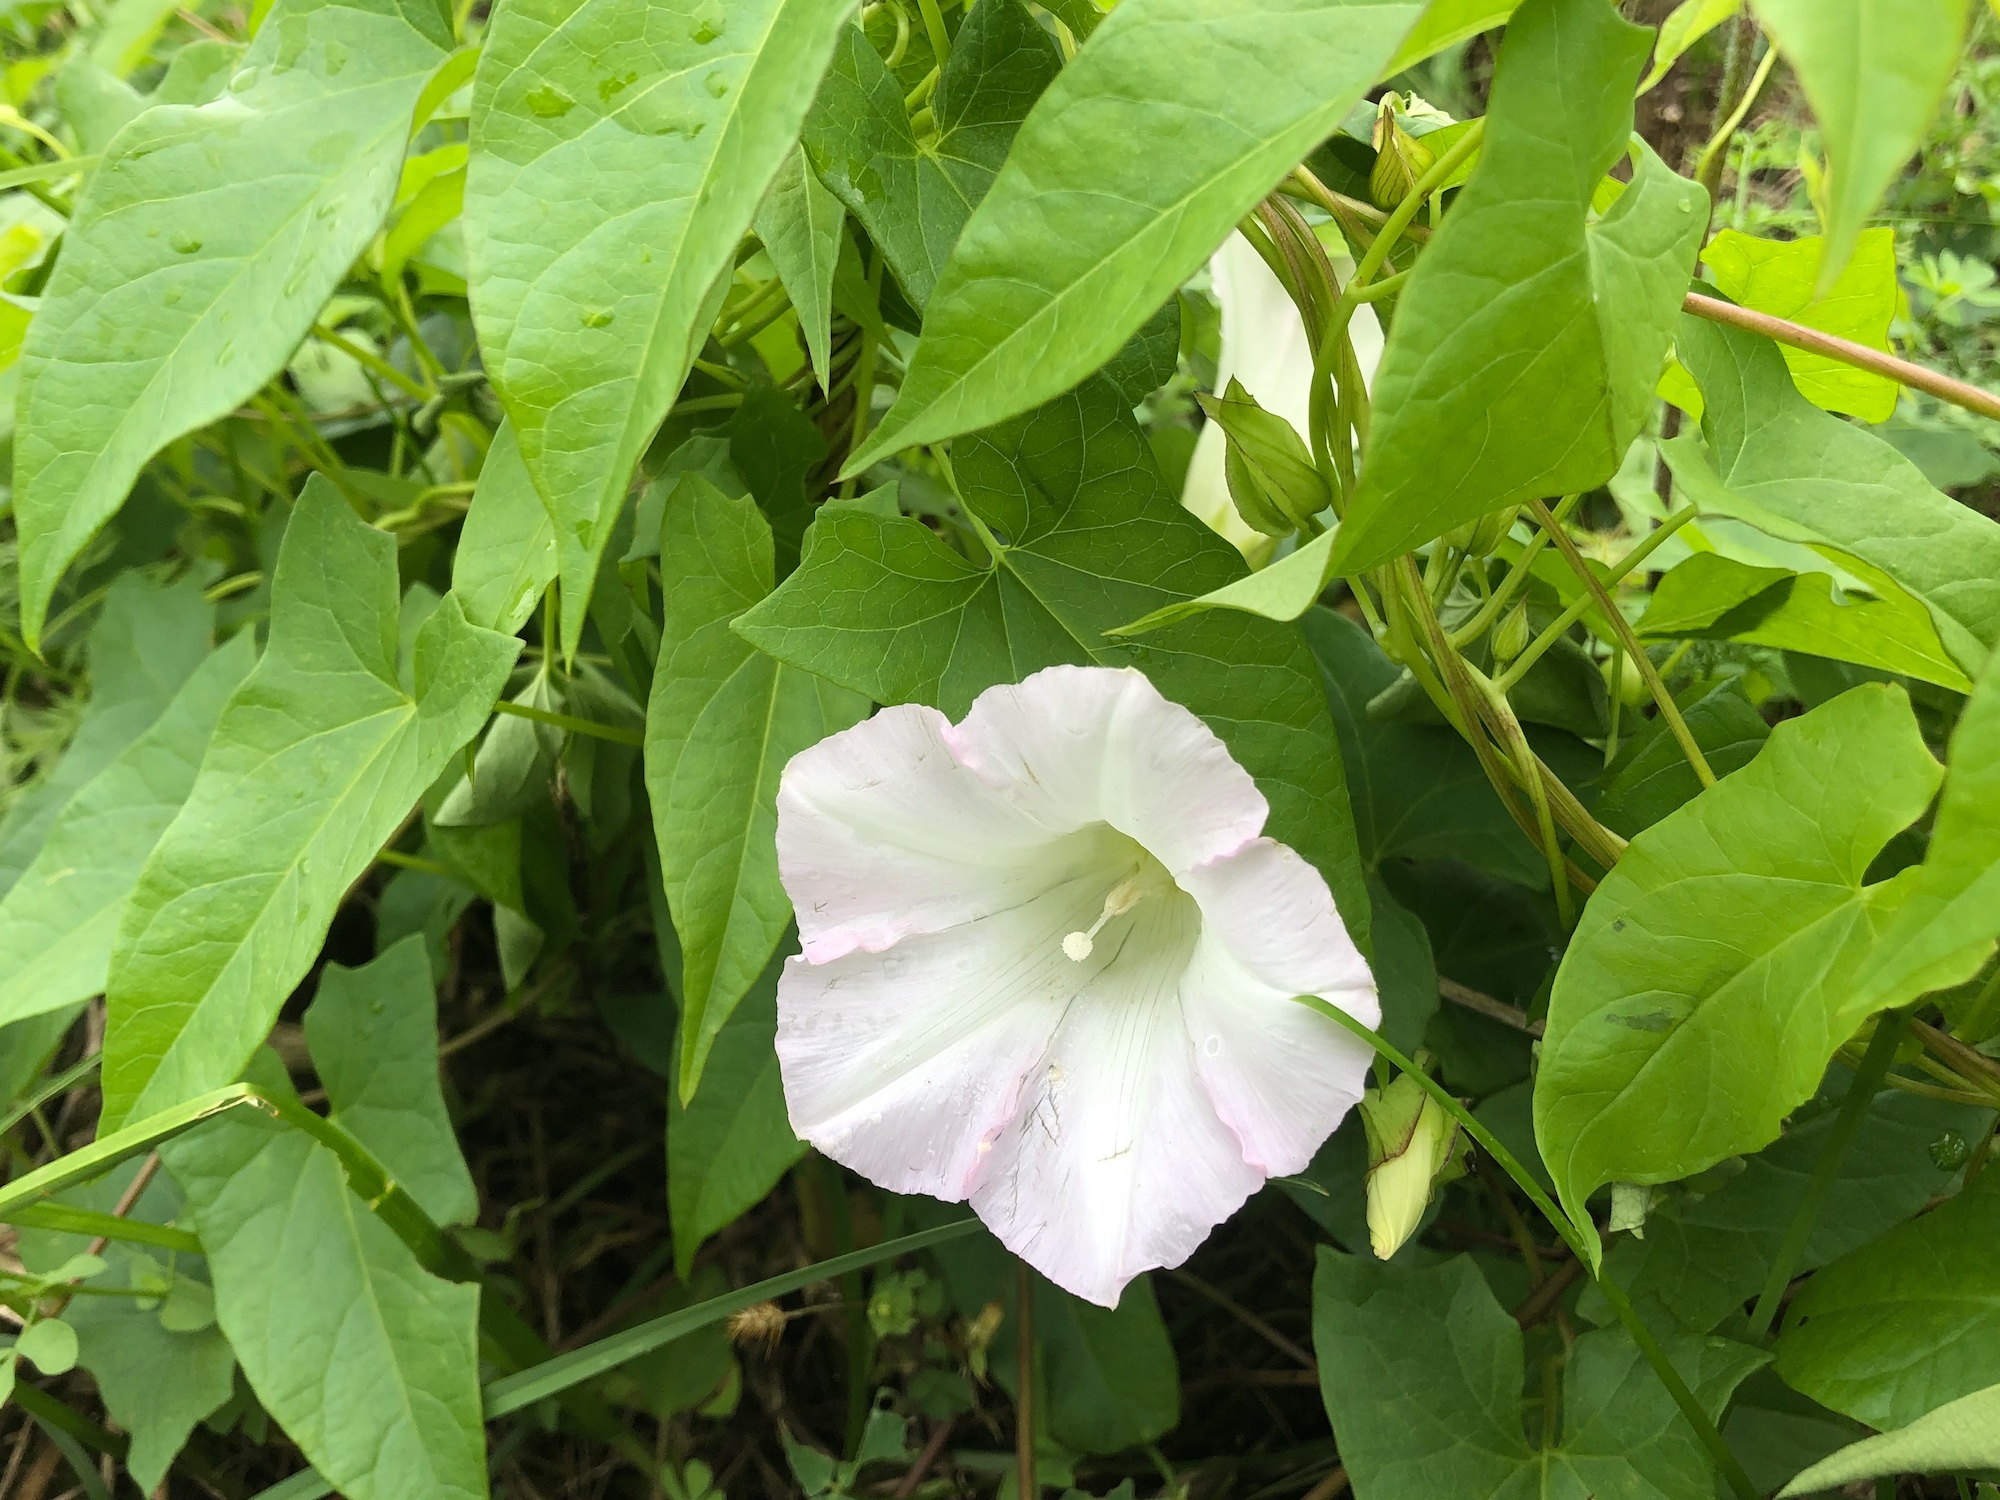 Hedge Bindweed on shore of Marion Dunn Pond in Madison, Wisconsin on September 28, 2019.